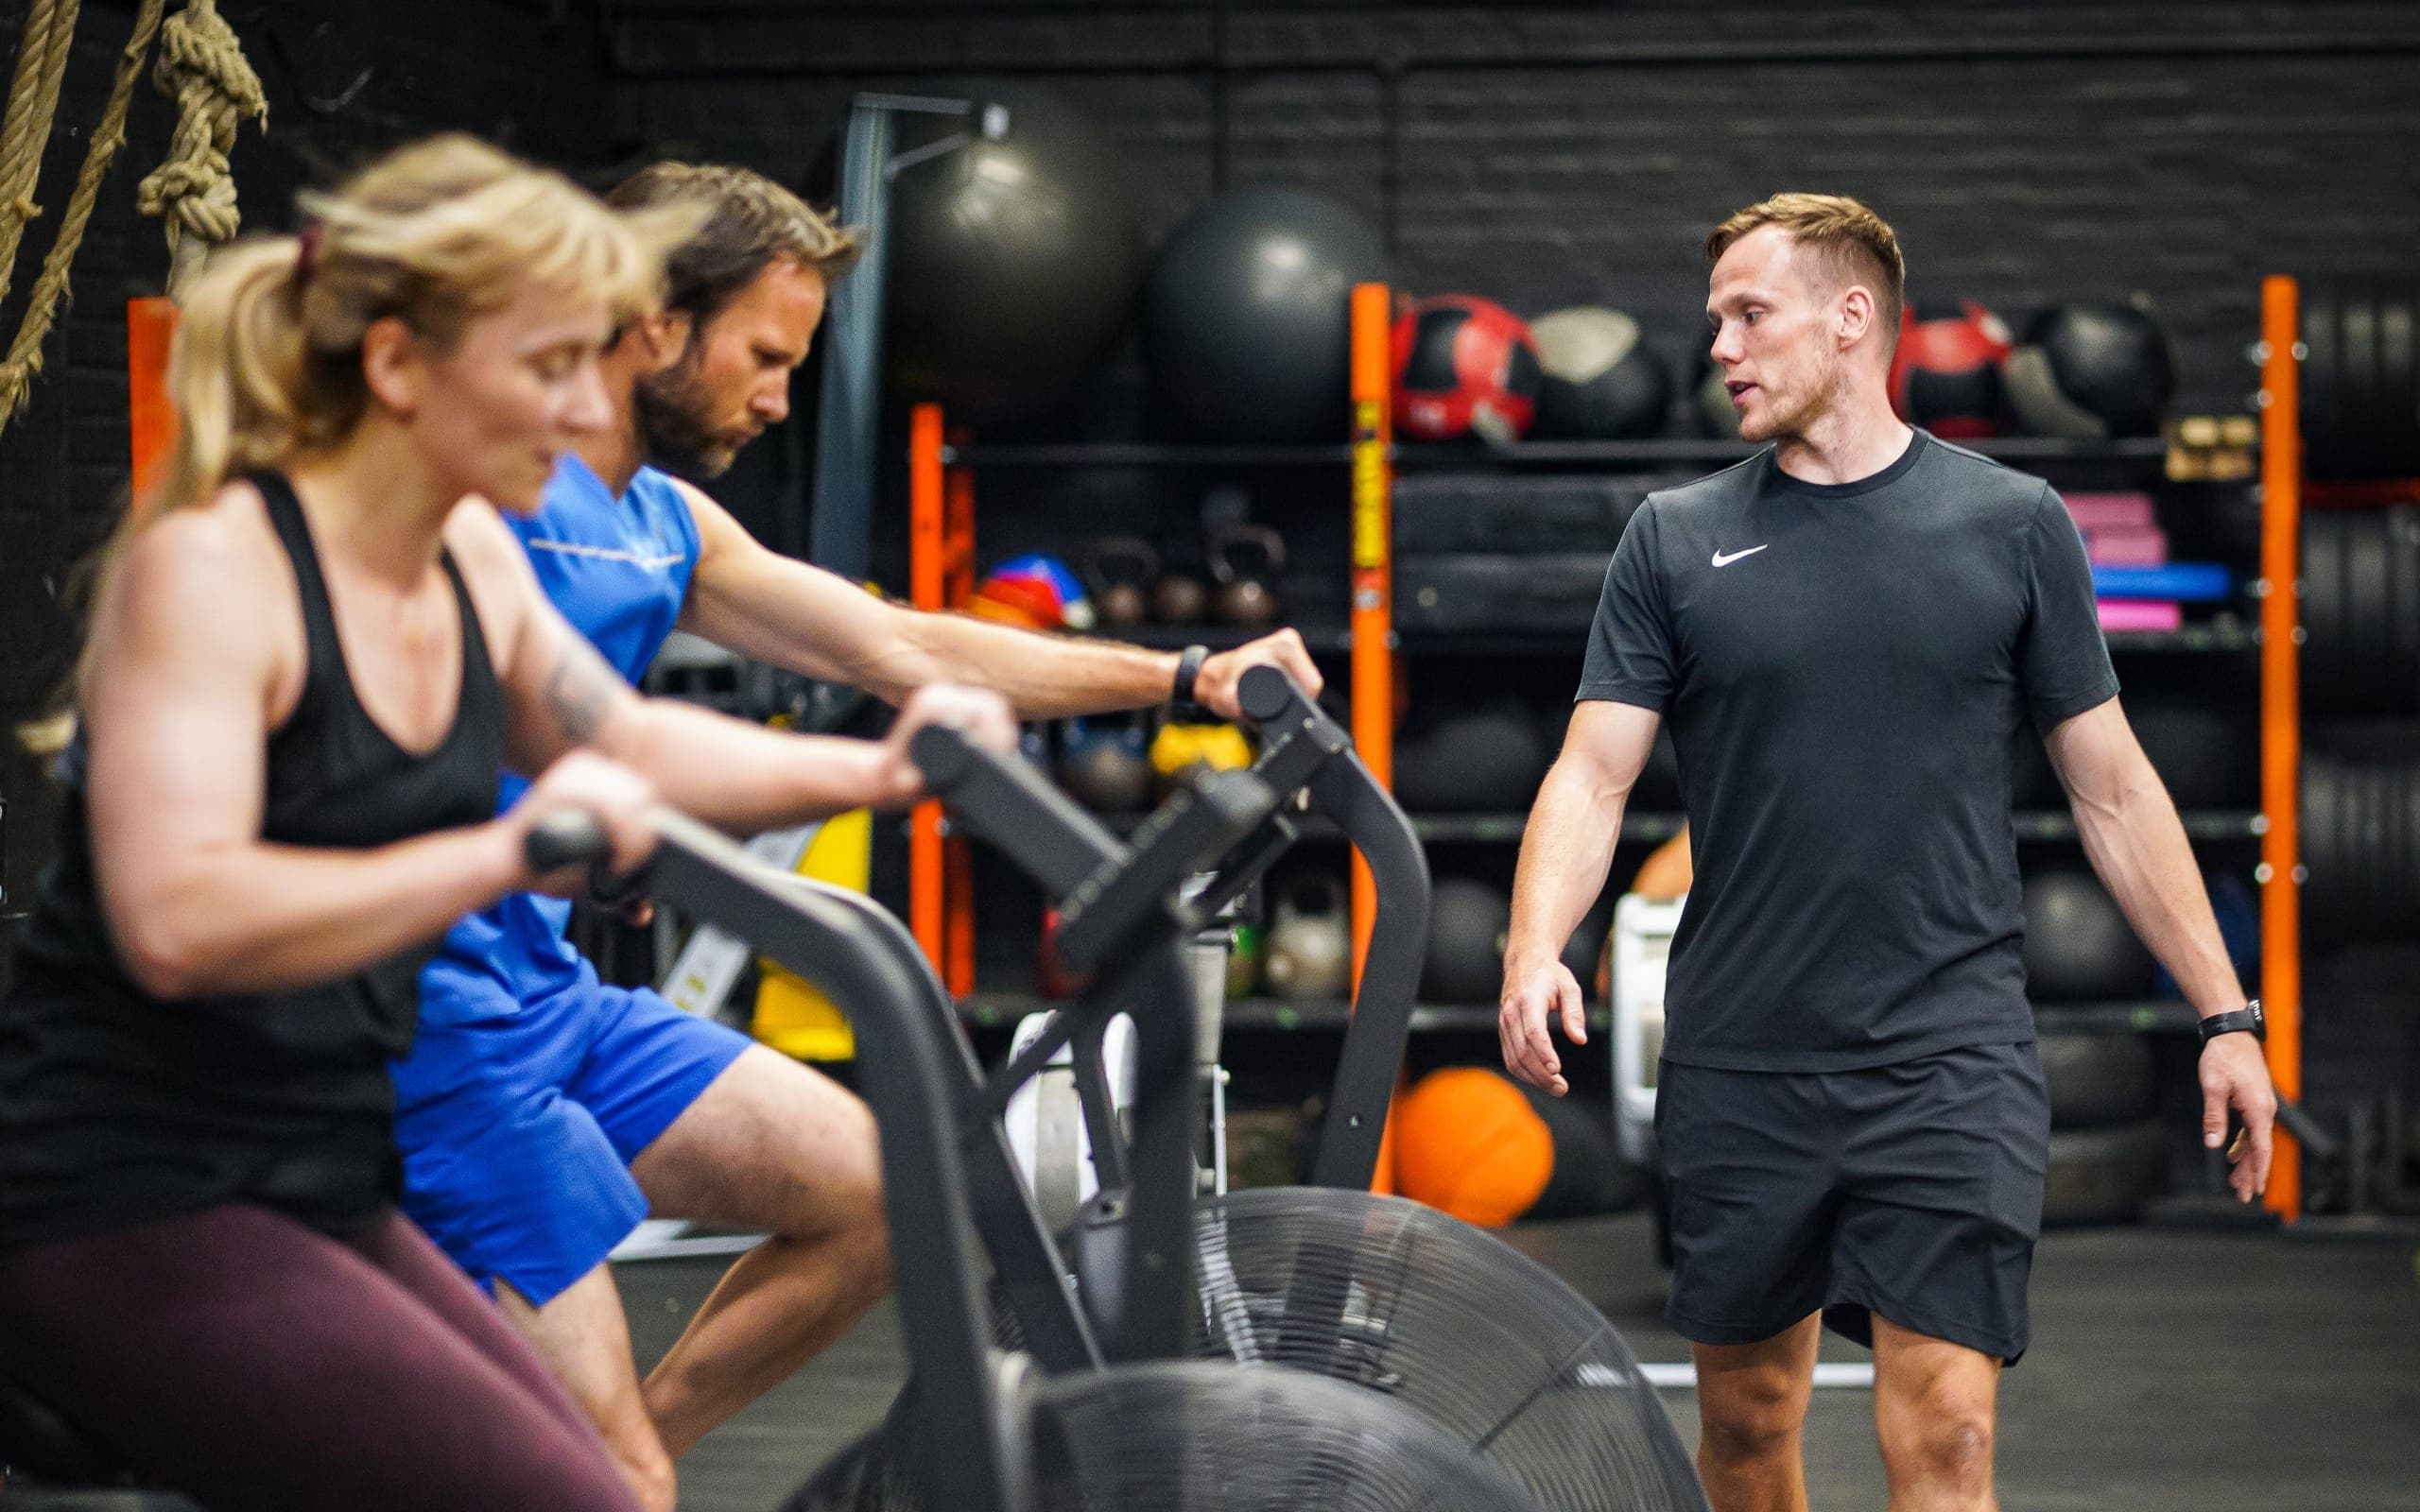 Small Group Personal Training - 21 Day Challenge - Foundry Personal Training Gyms